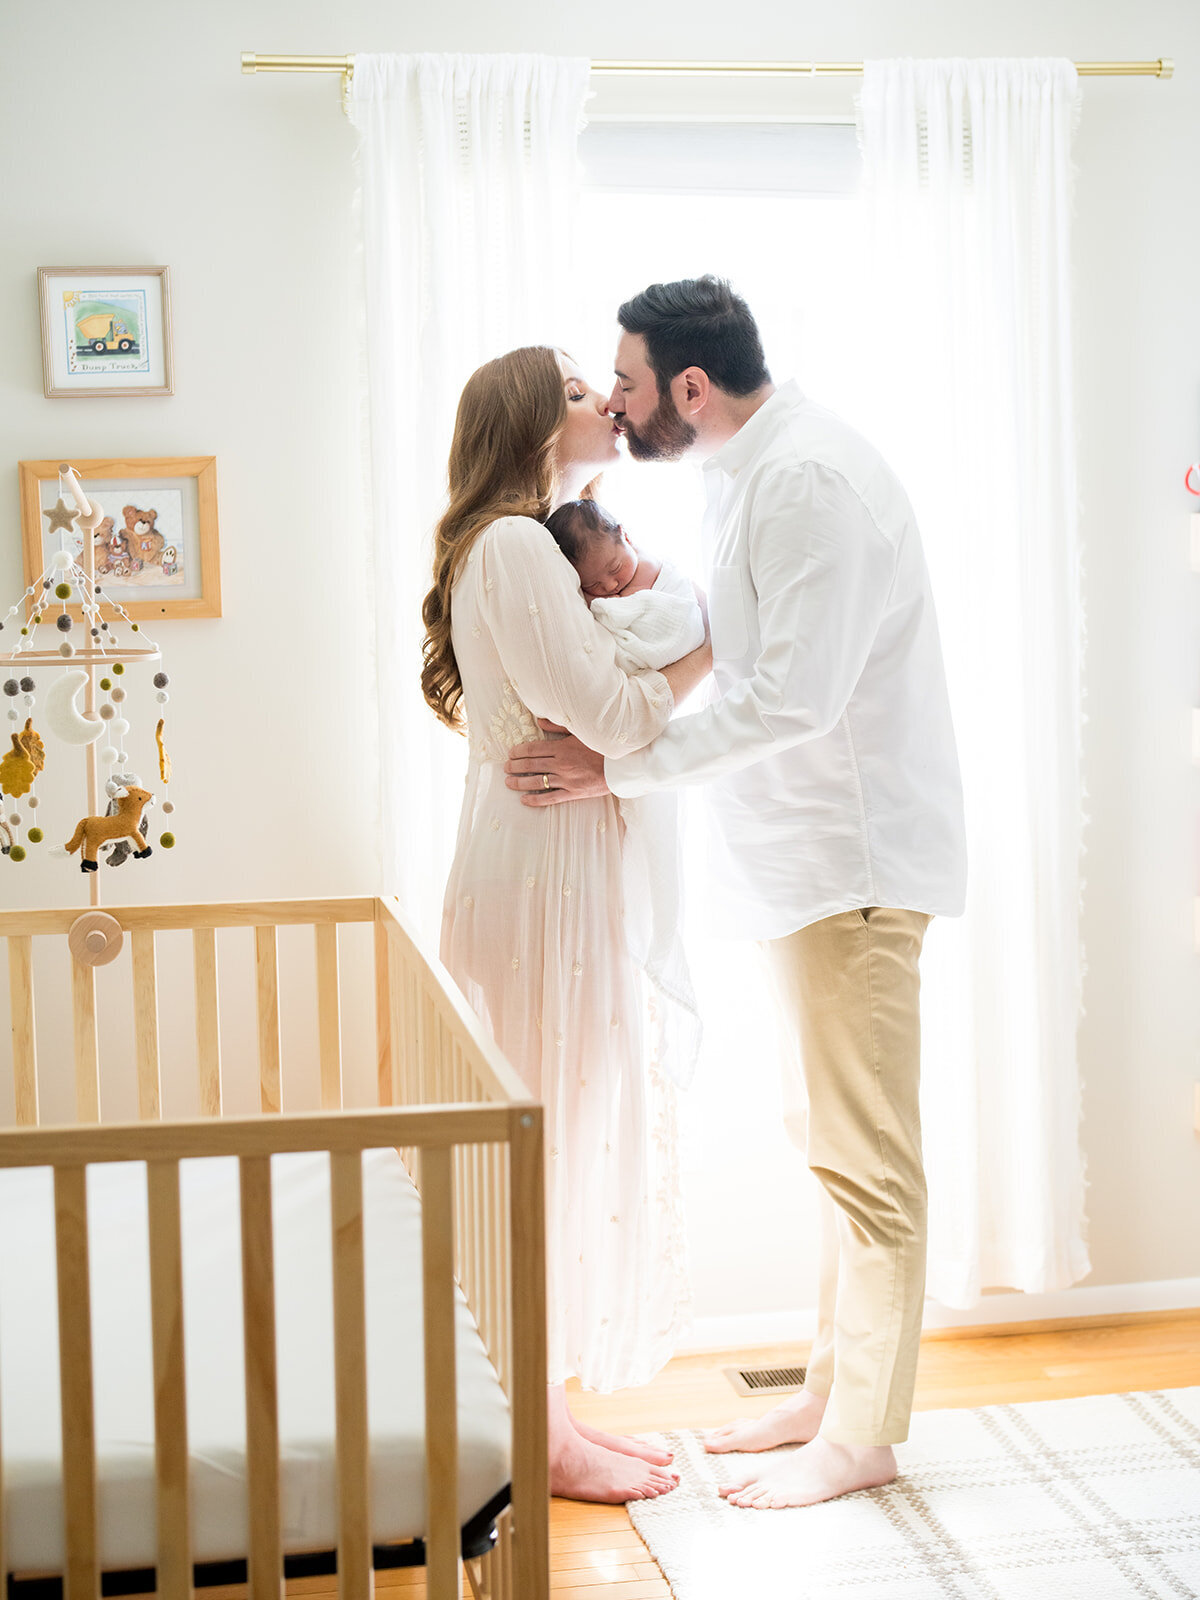 Mother and father lean to kiss as they stand in the nursery holding their baby boy.